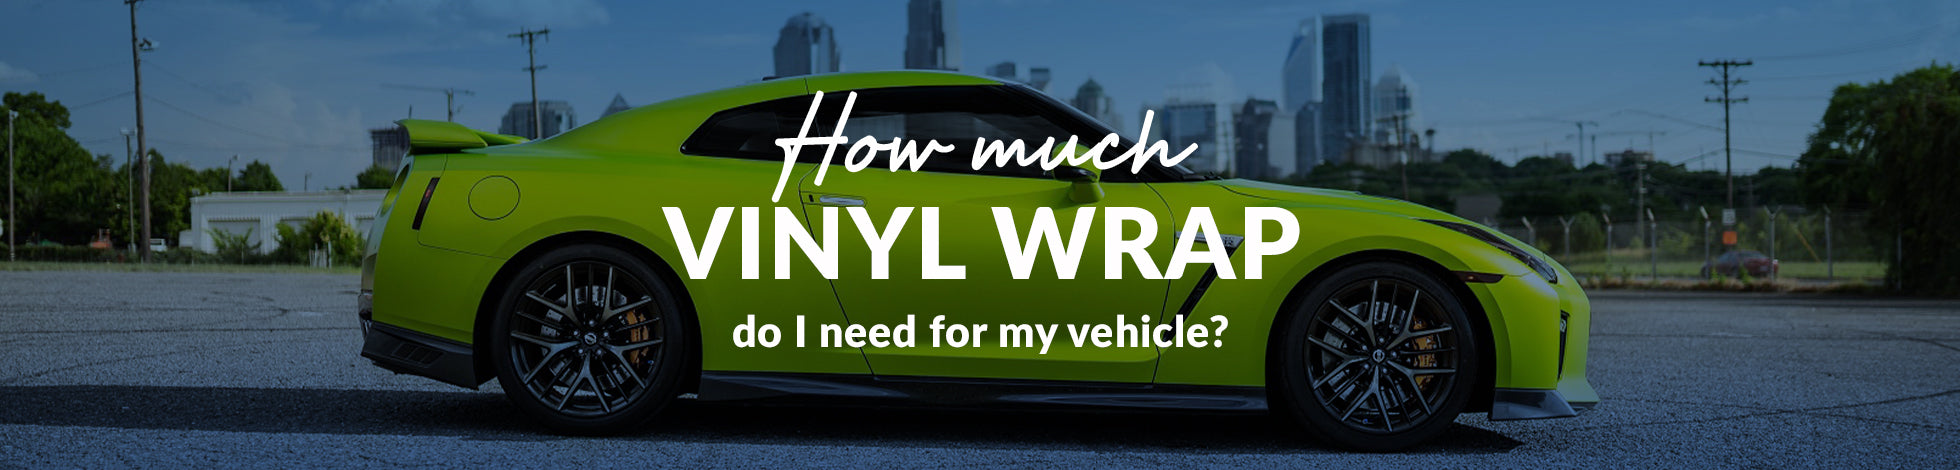 How Much Wrap Do I Need for My Vehicle?